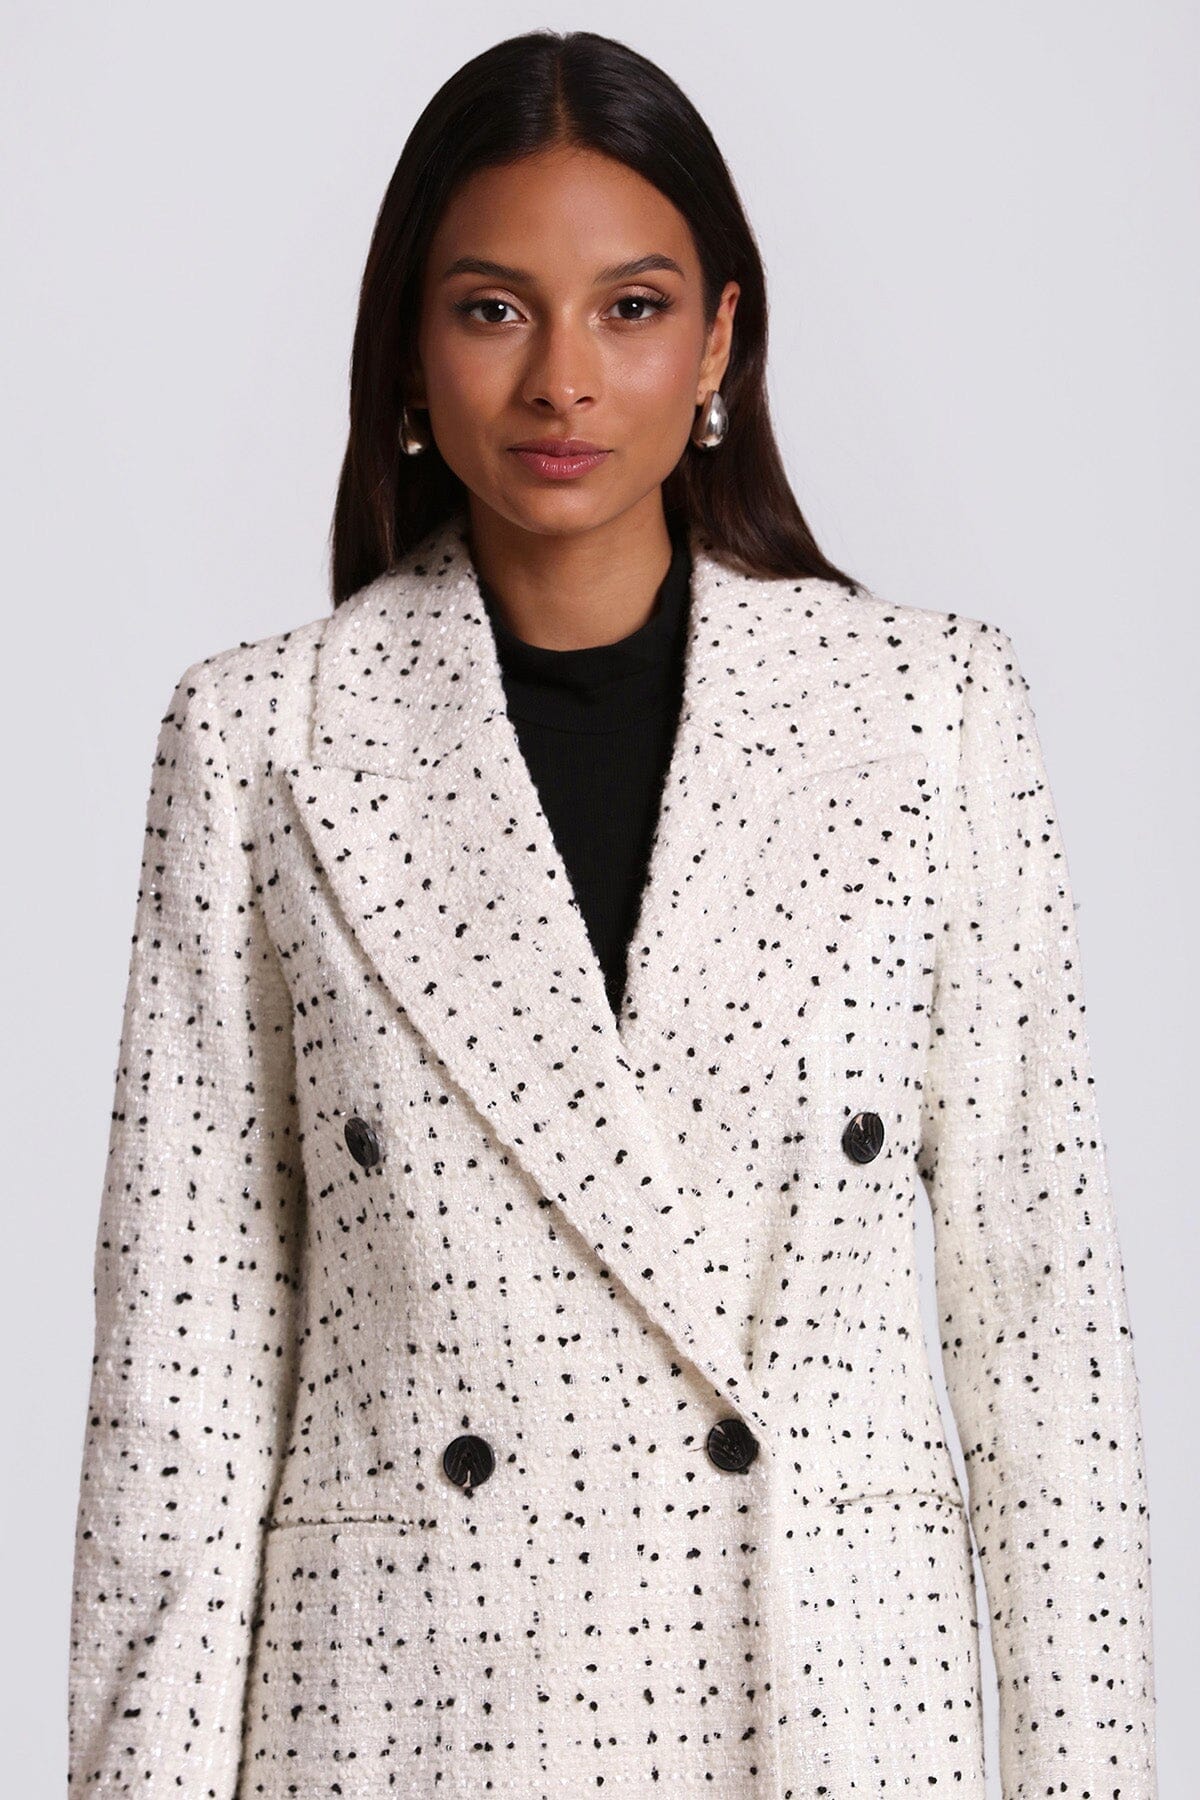 Black and white tweed tailored double breasted longline coat jacket - women's figure flattering fall winter fashion coats outerwear